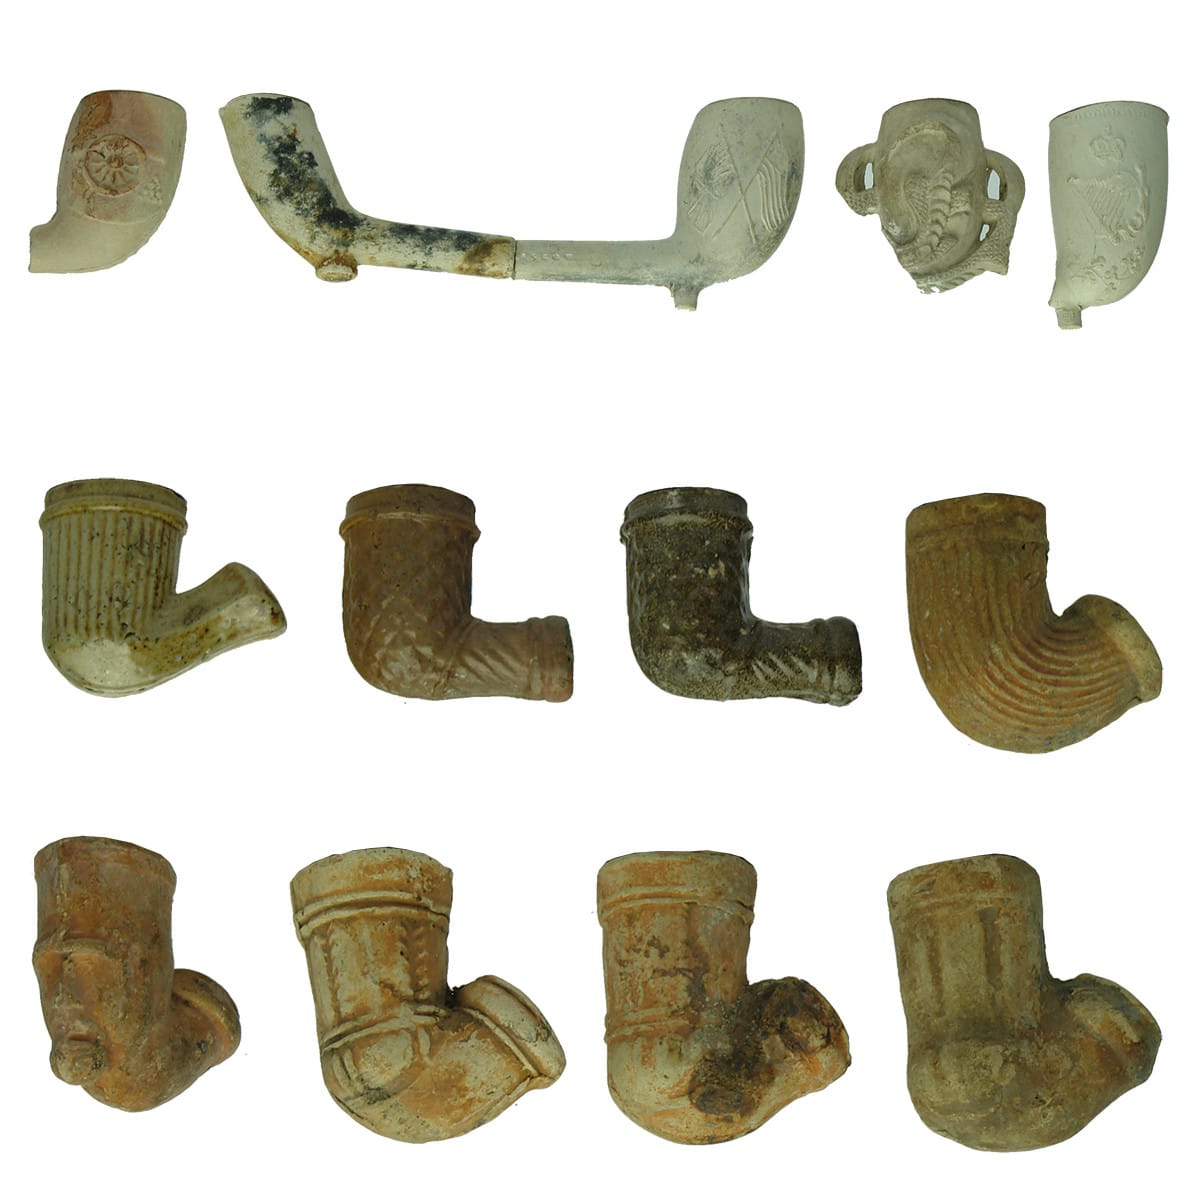 13 Clay Pipes. 5 Damaged, 4 complete pipe bowls and 4 complete terracotta type pipe bowls.